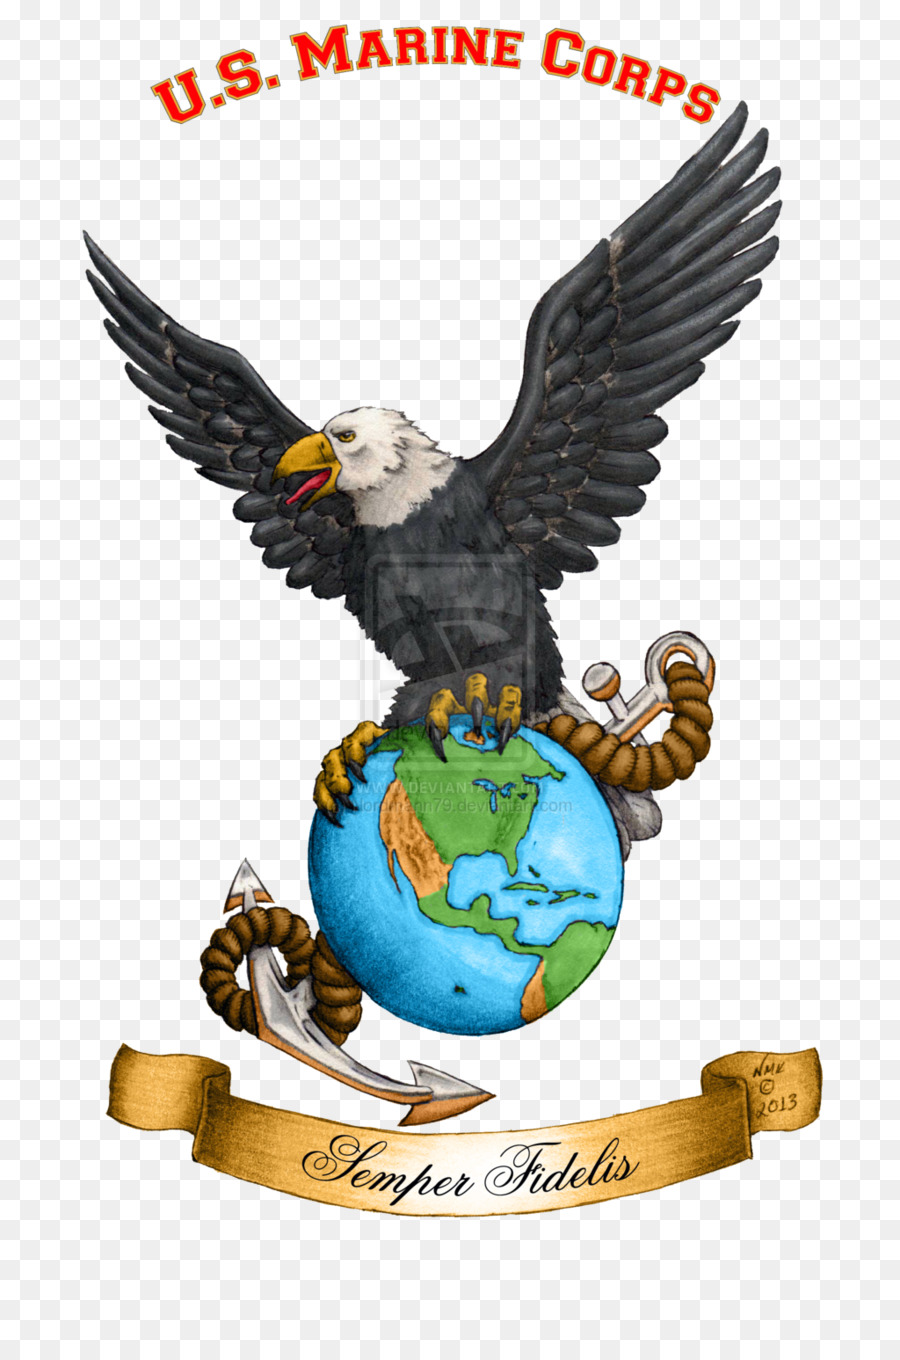 Eagle, Globe, and Anchor United States Marine Corps Marines - eagle png download - 1024*1537 - Free Transparent Eagle Globe And Anchor png Download.